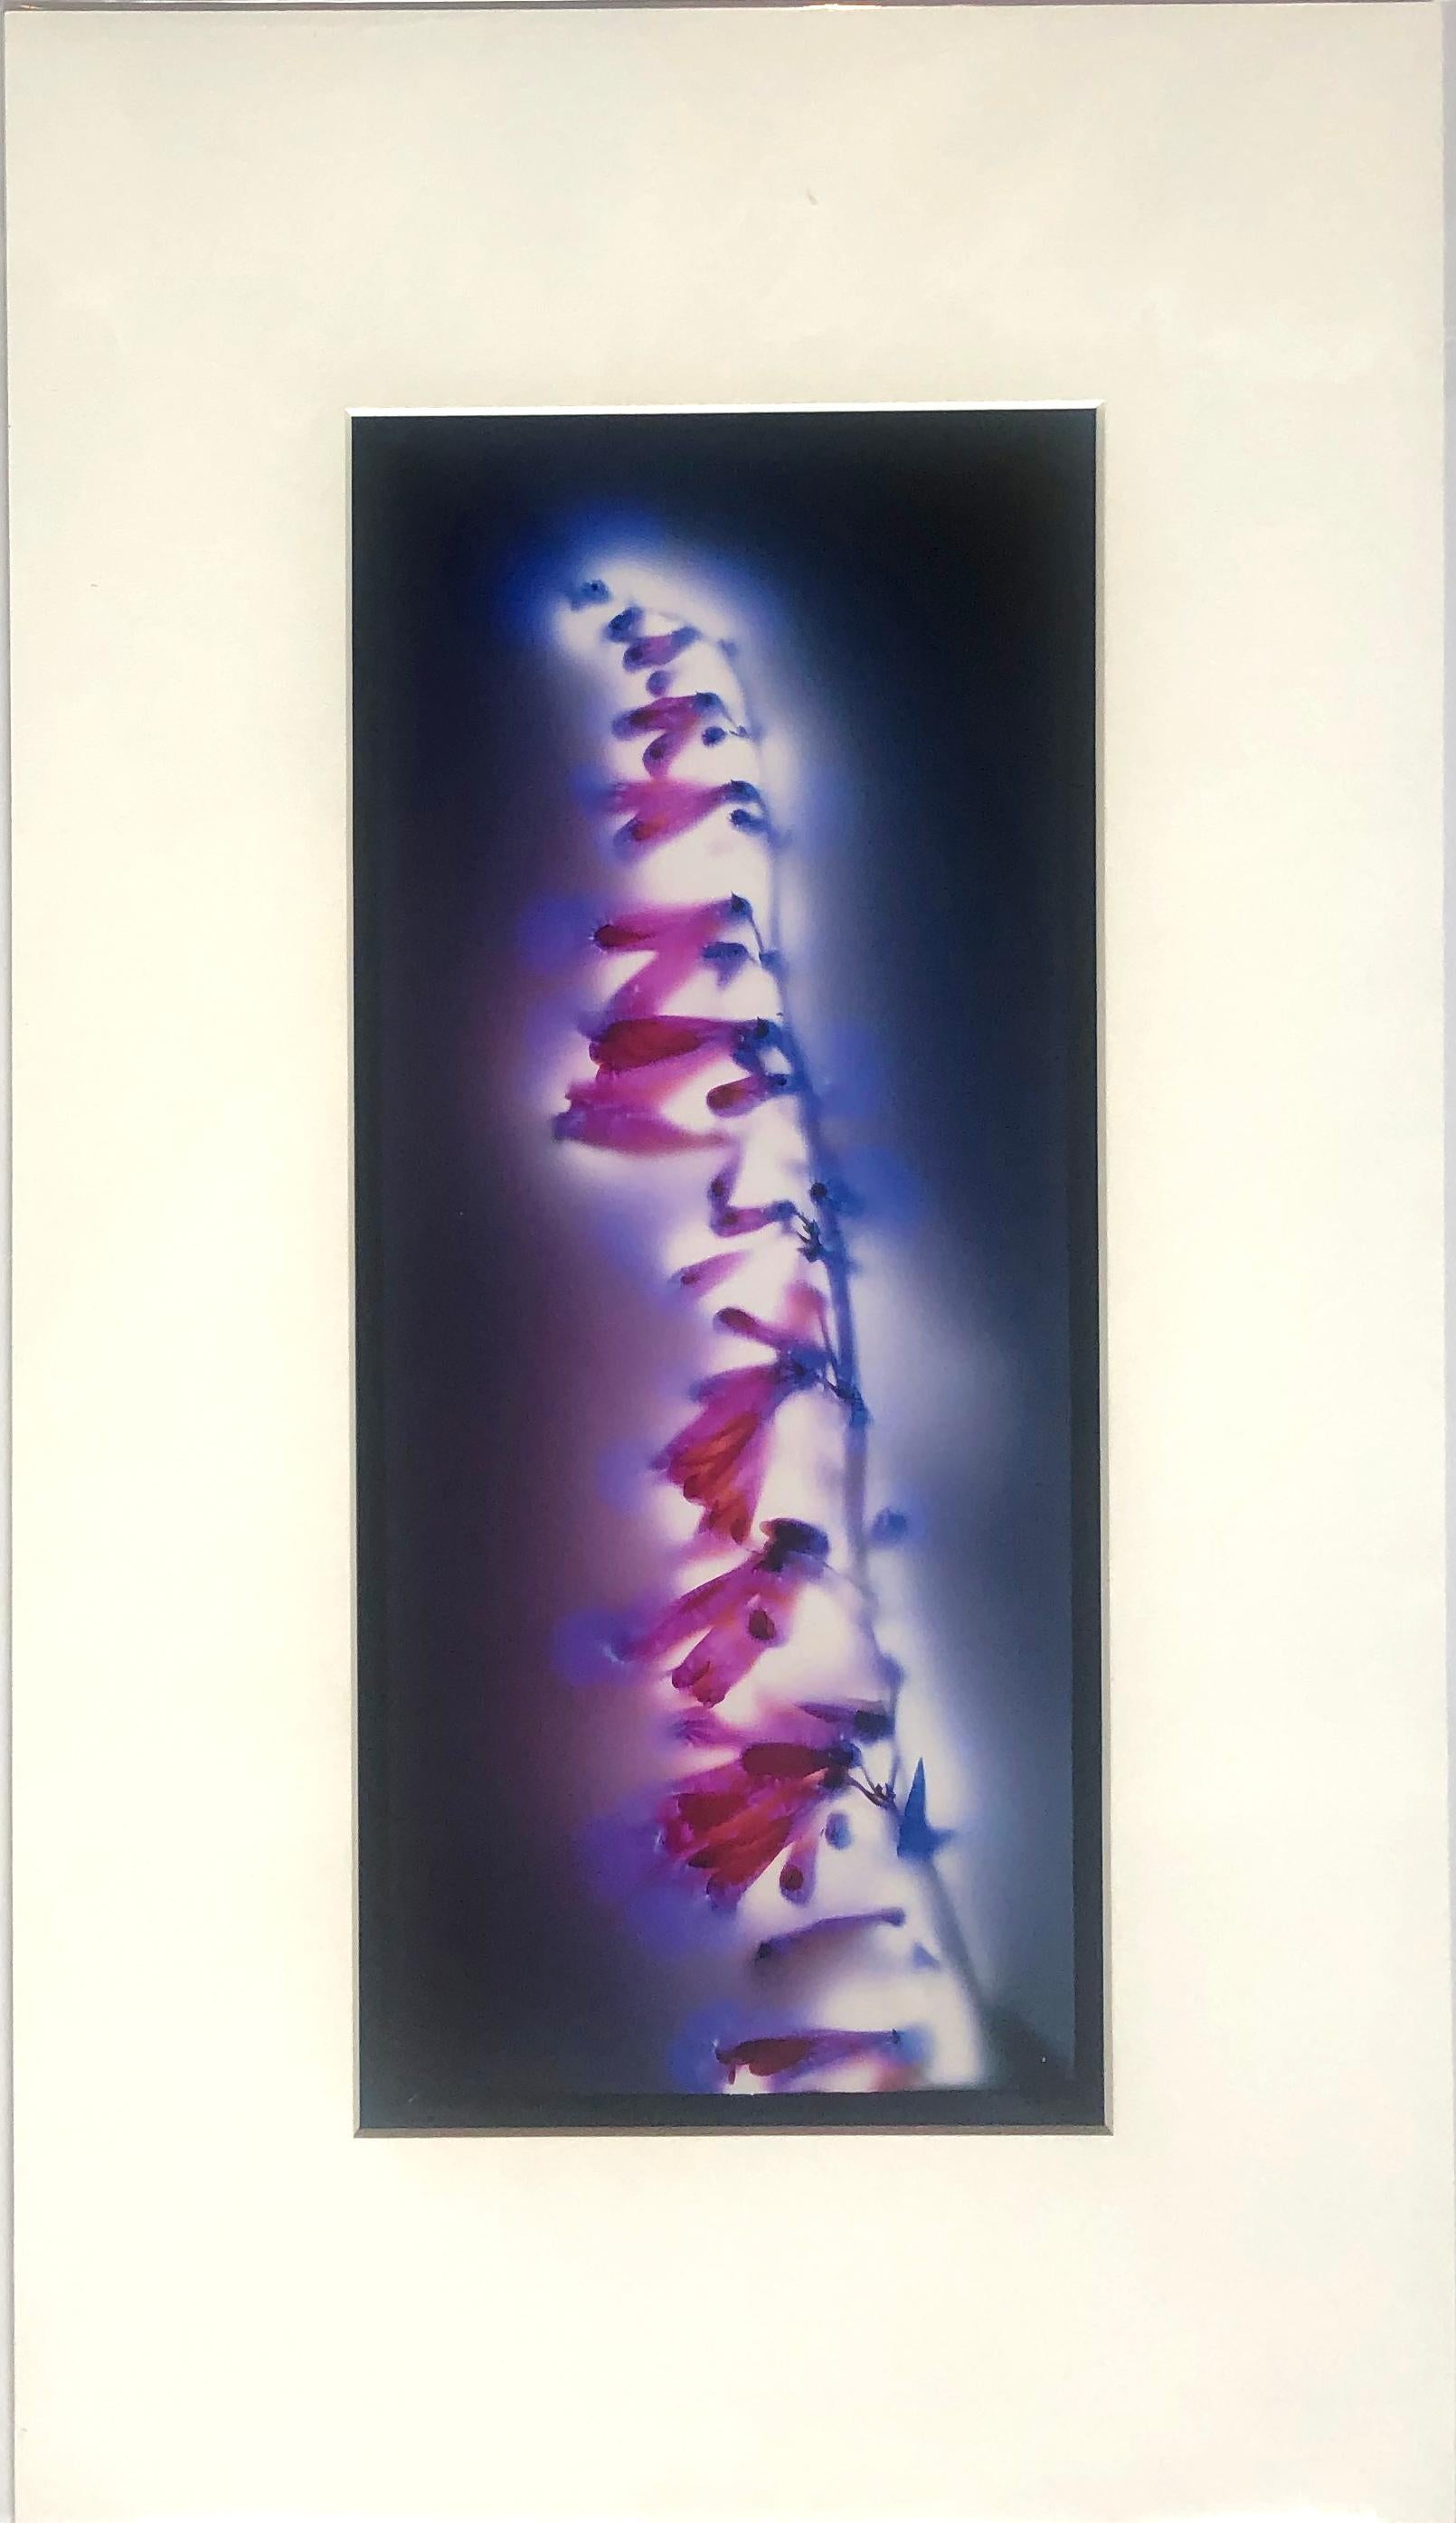 A cameraless photographic print of a Firecracker Penstemon flower in fiery pink, purple, and blue by acclaimed photographer Robert Buelteman. Buelteman, originally a traditional landscape photographer, sought to expand the photographic tradition and